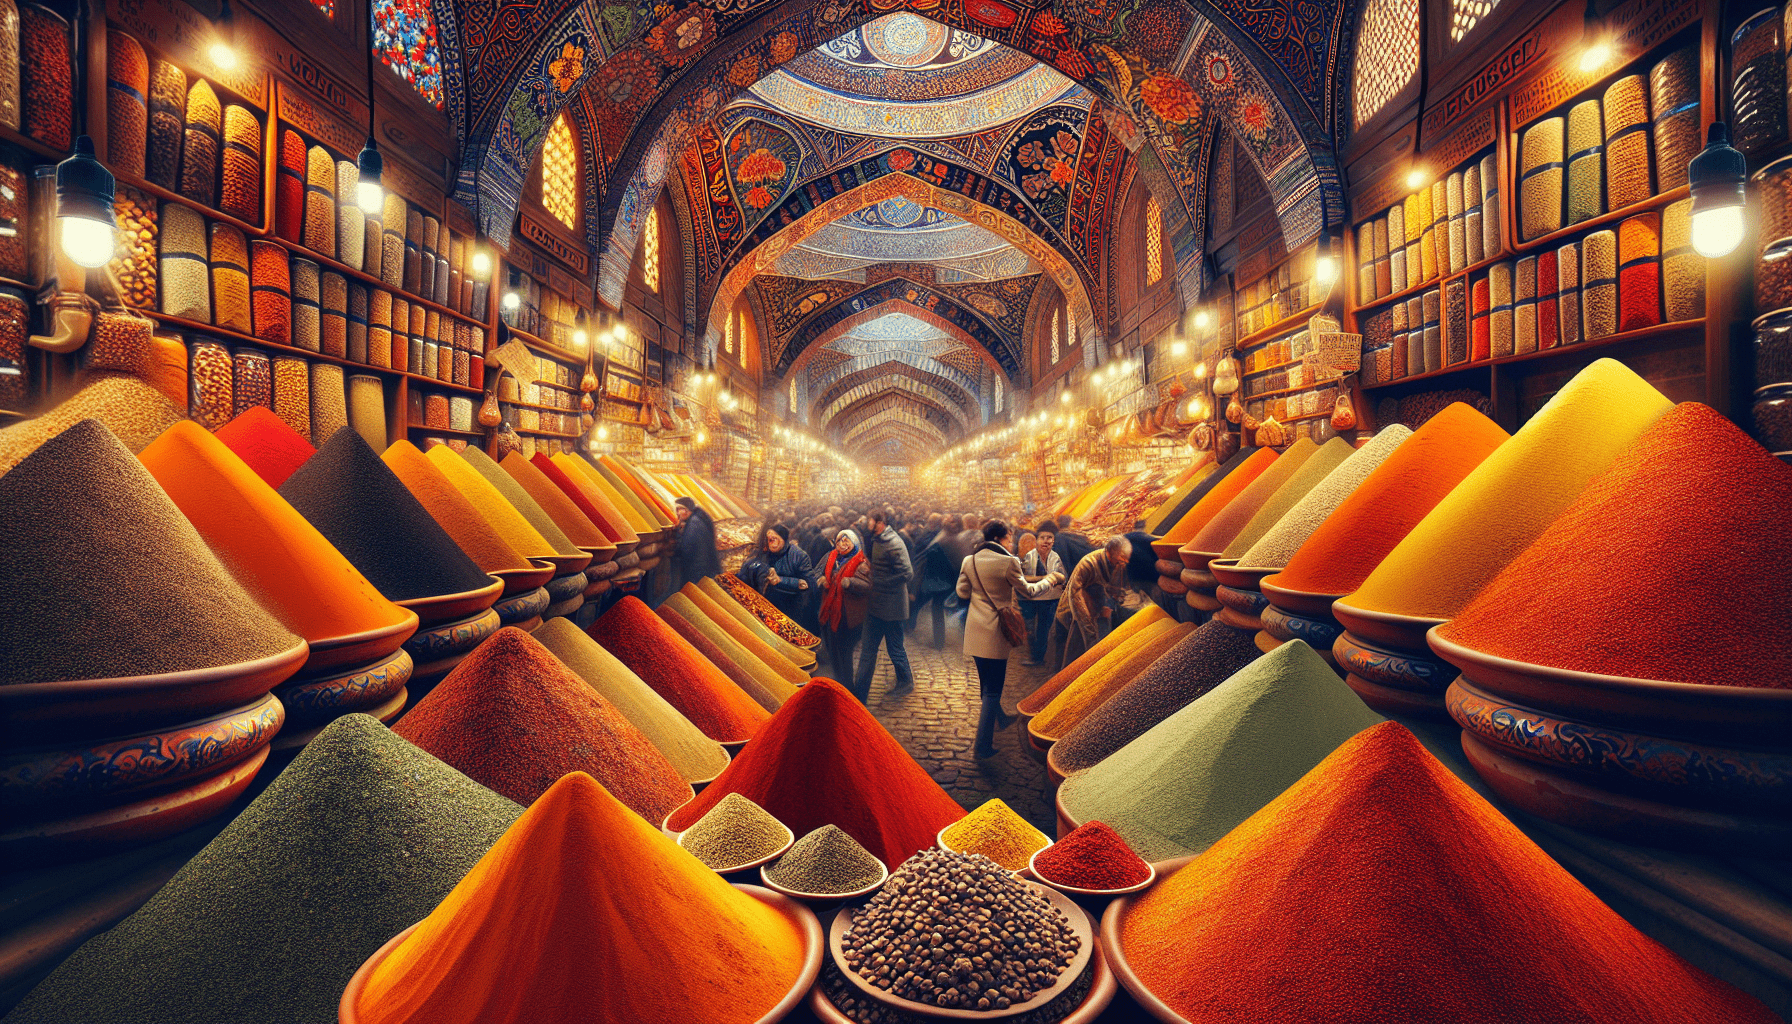 People browse through piles of colorful spices in a vibrant market with intricately decorated ceilings.